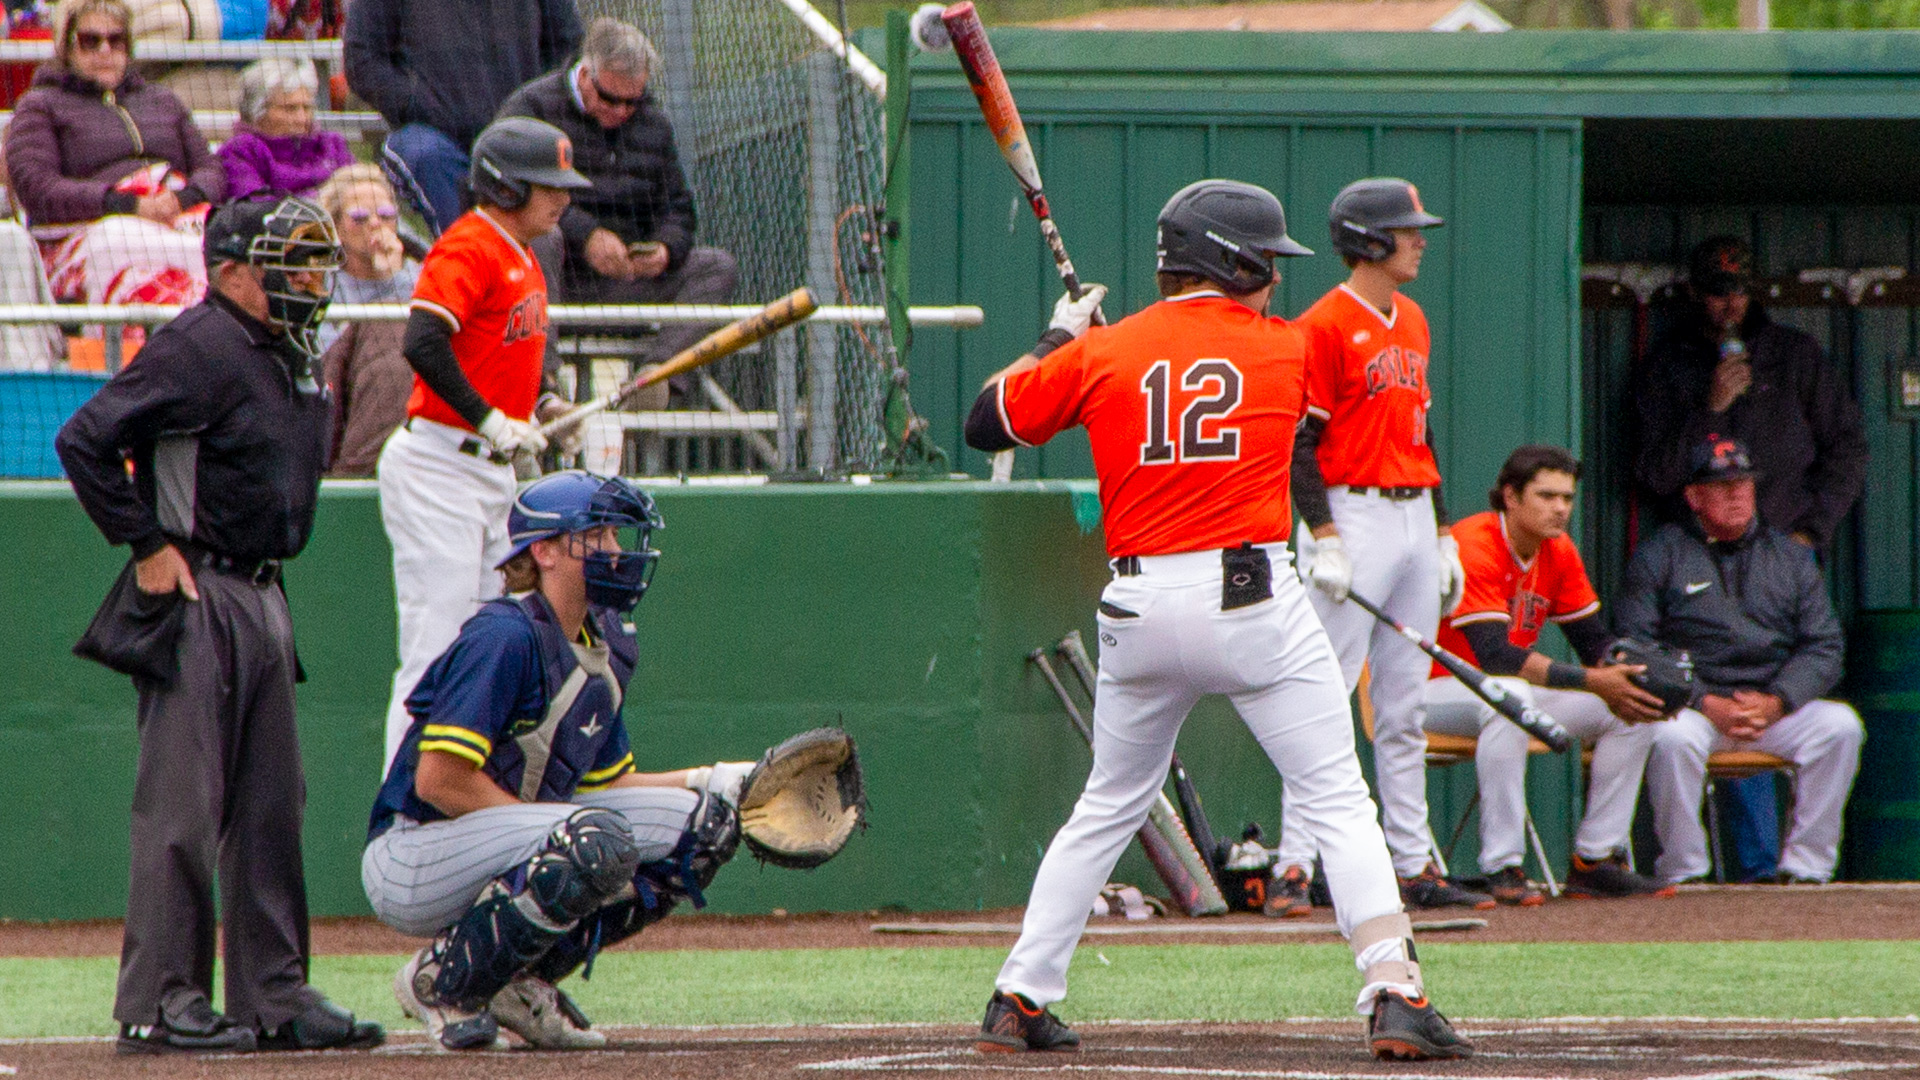 Tiger baseball team inches closer to wrapping up second place in the conference